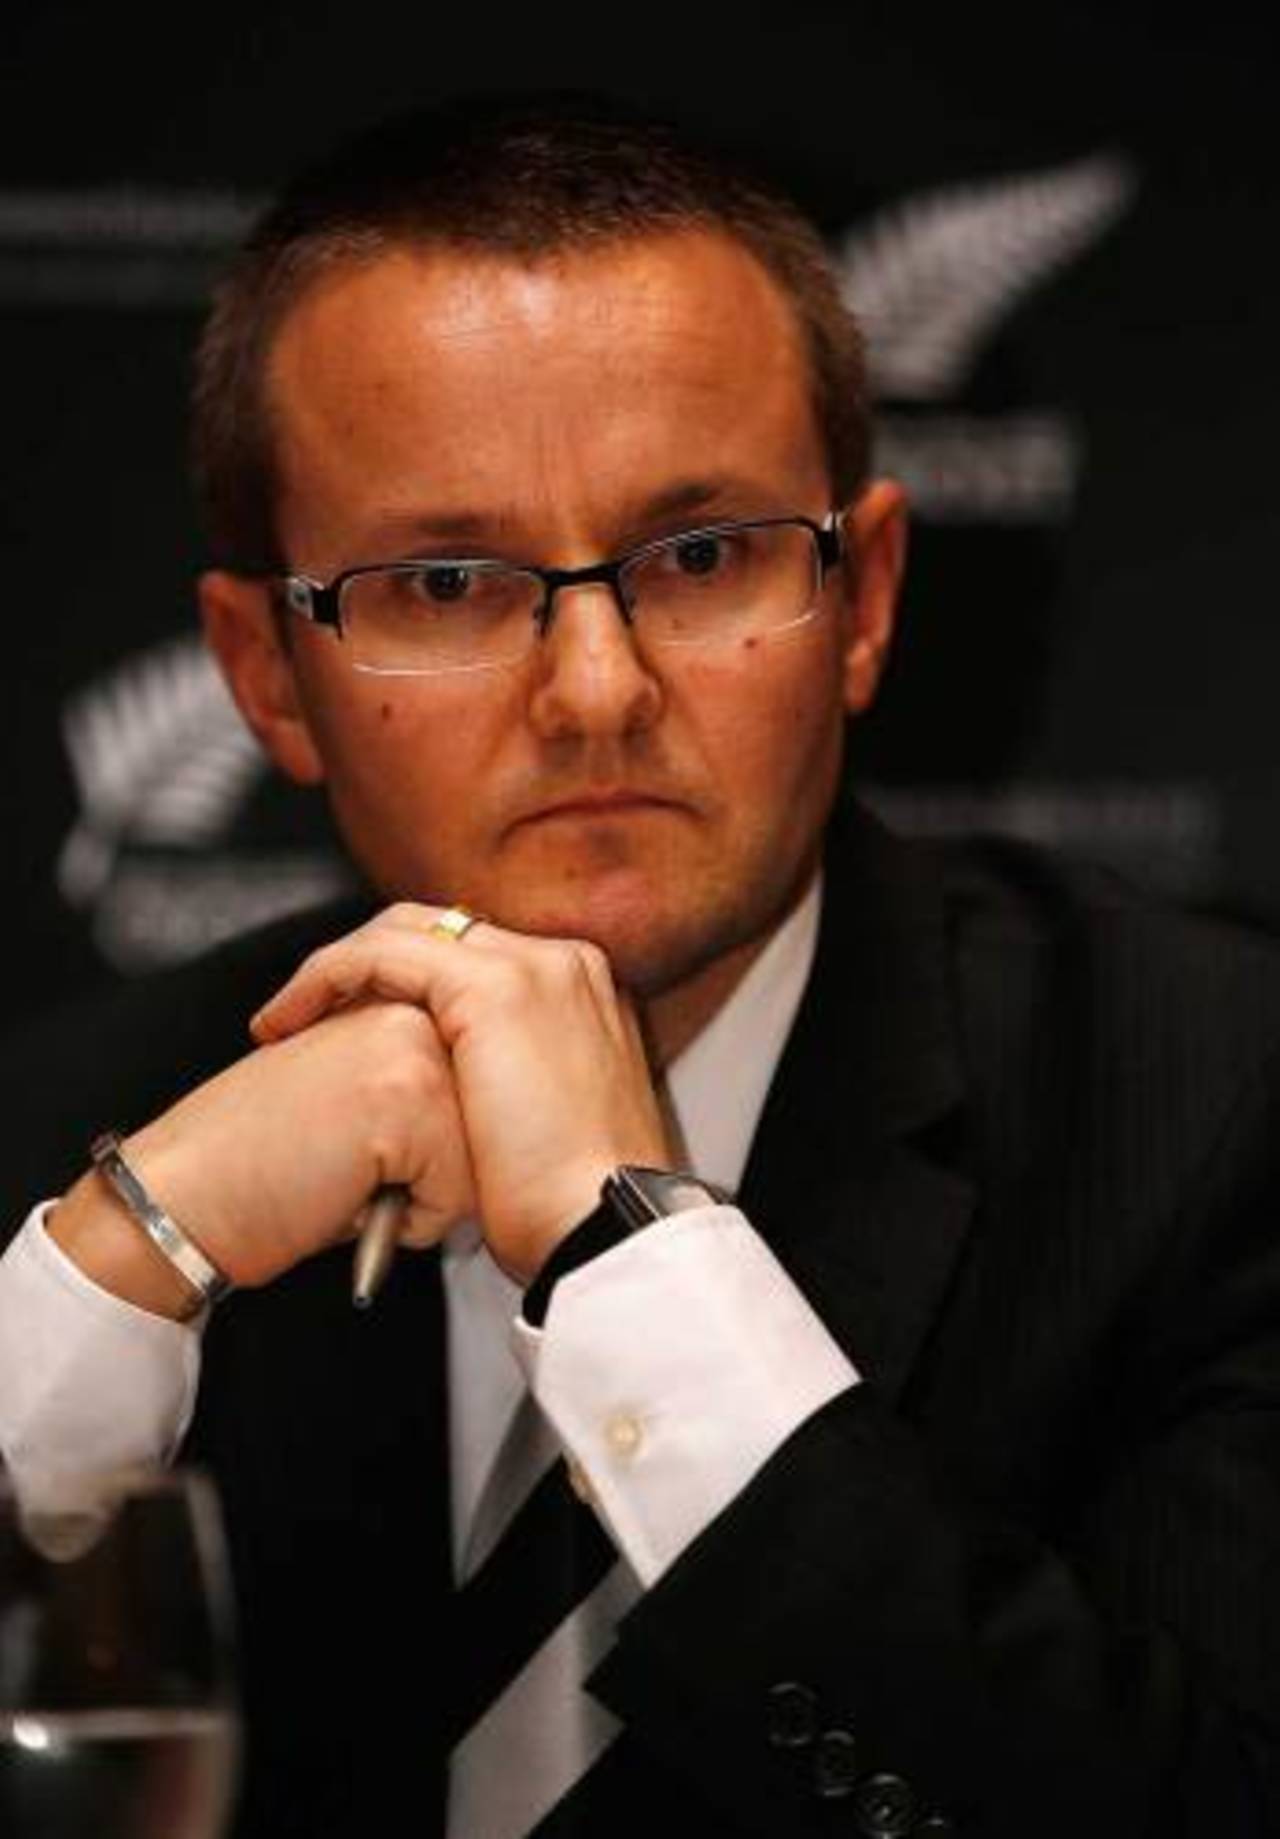 Mike Hesson has been named New Zealand's new head coach, Auckland, July 20, 2012